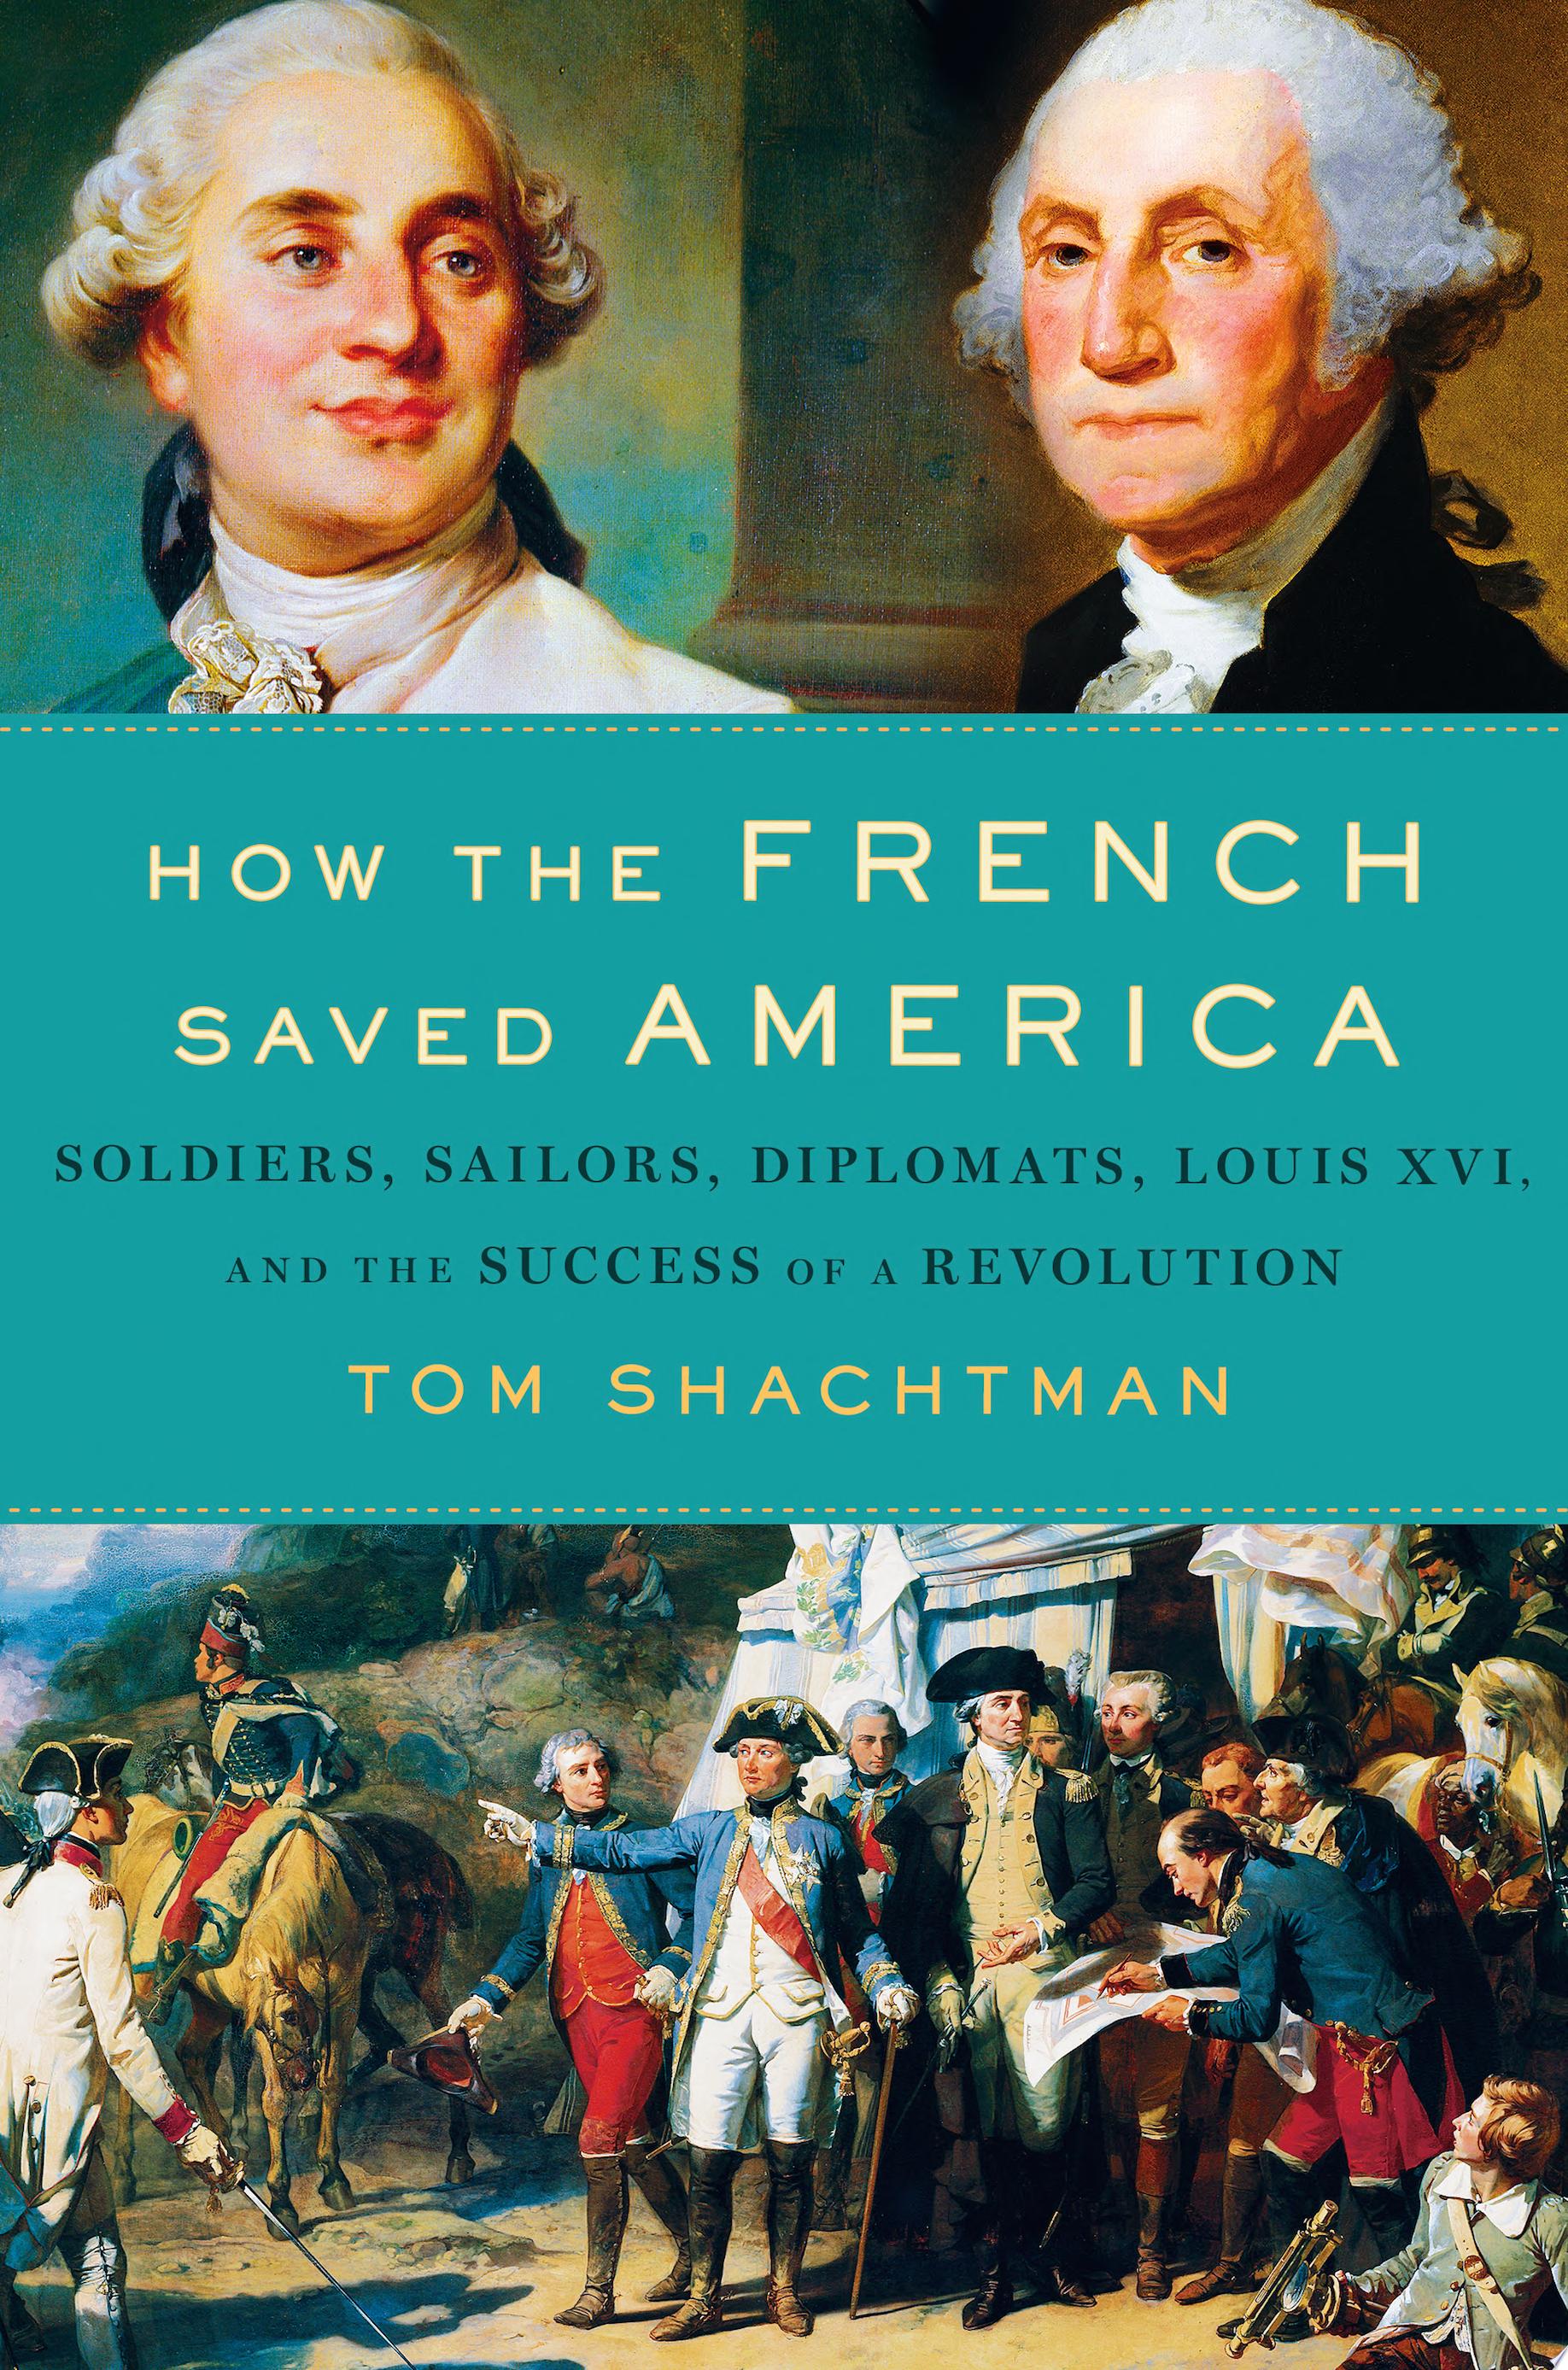 Image for "How the French Saved America"